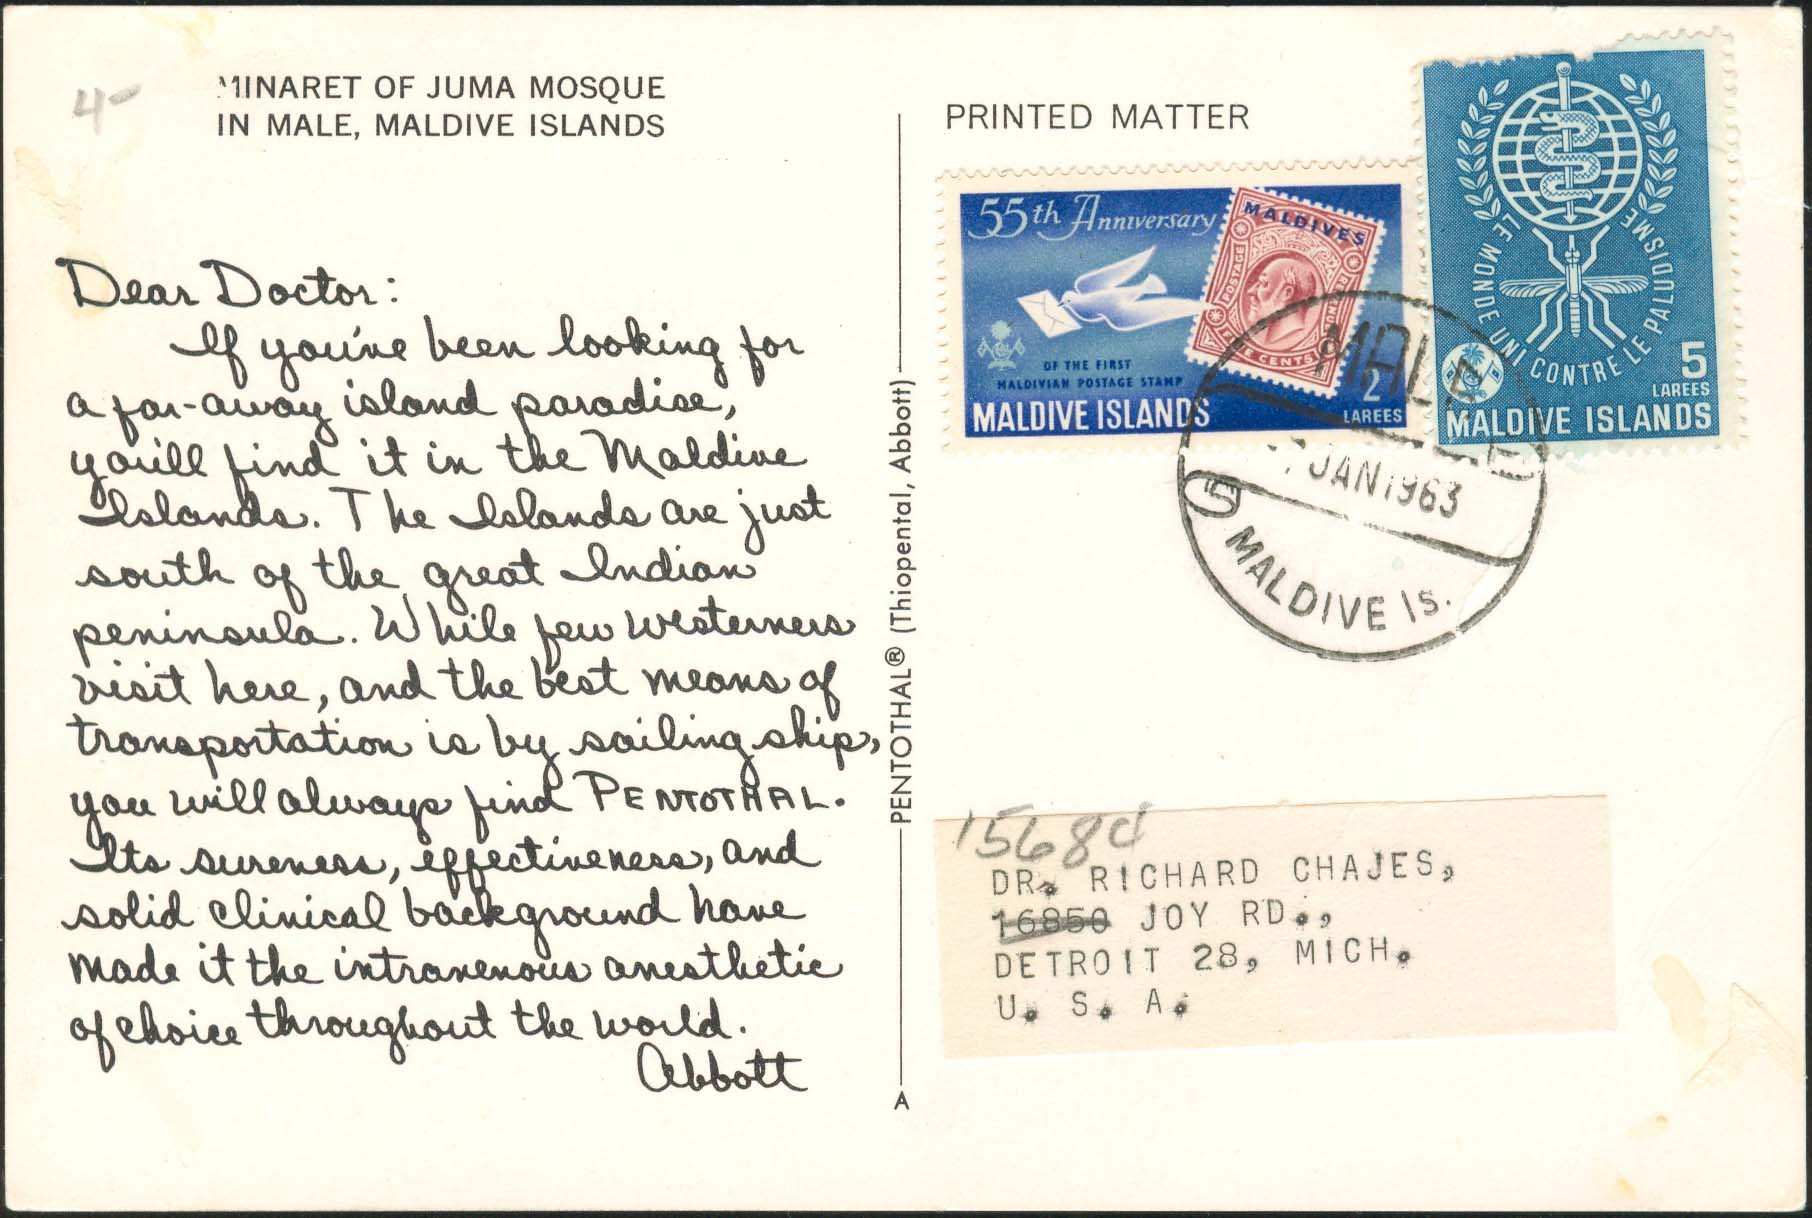 Dear Doctor Postcard - Type A - United States - 1963, Jan 7